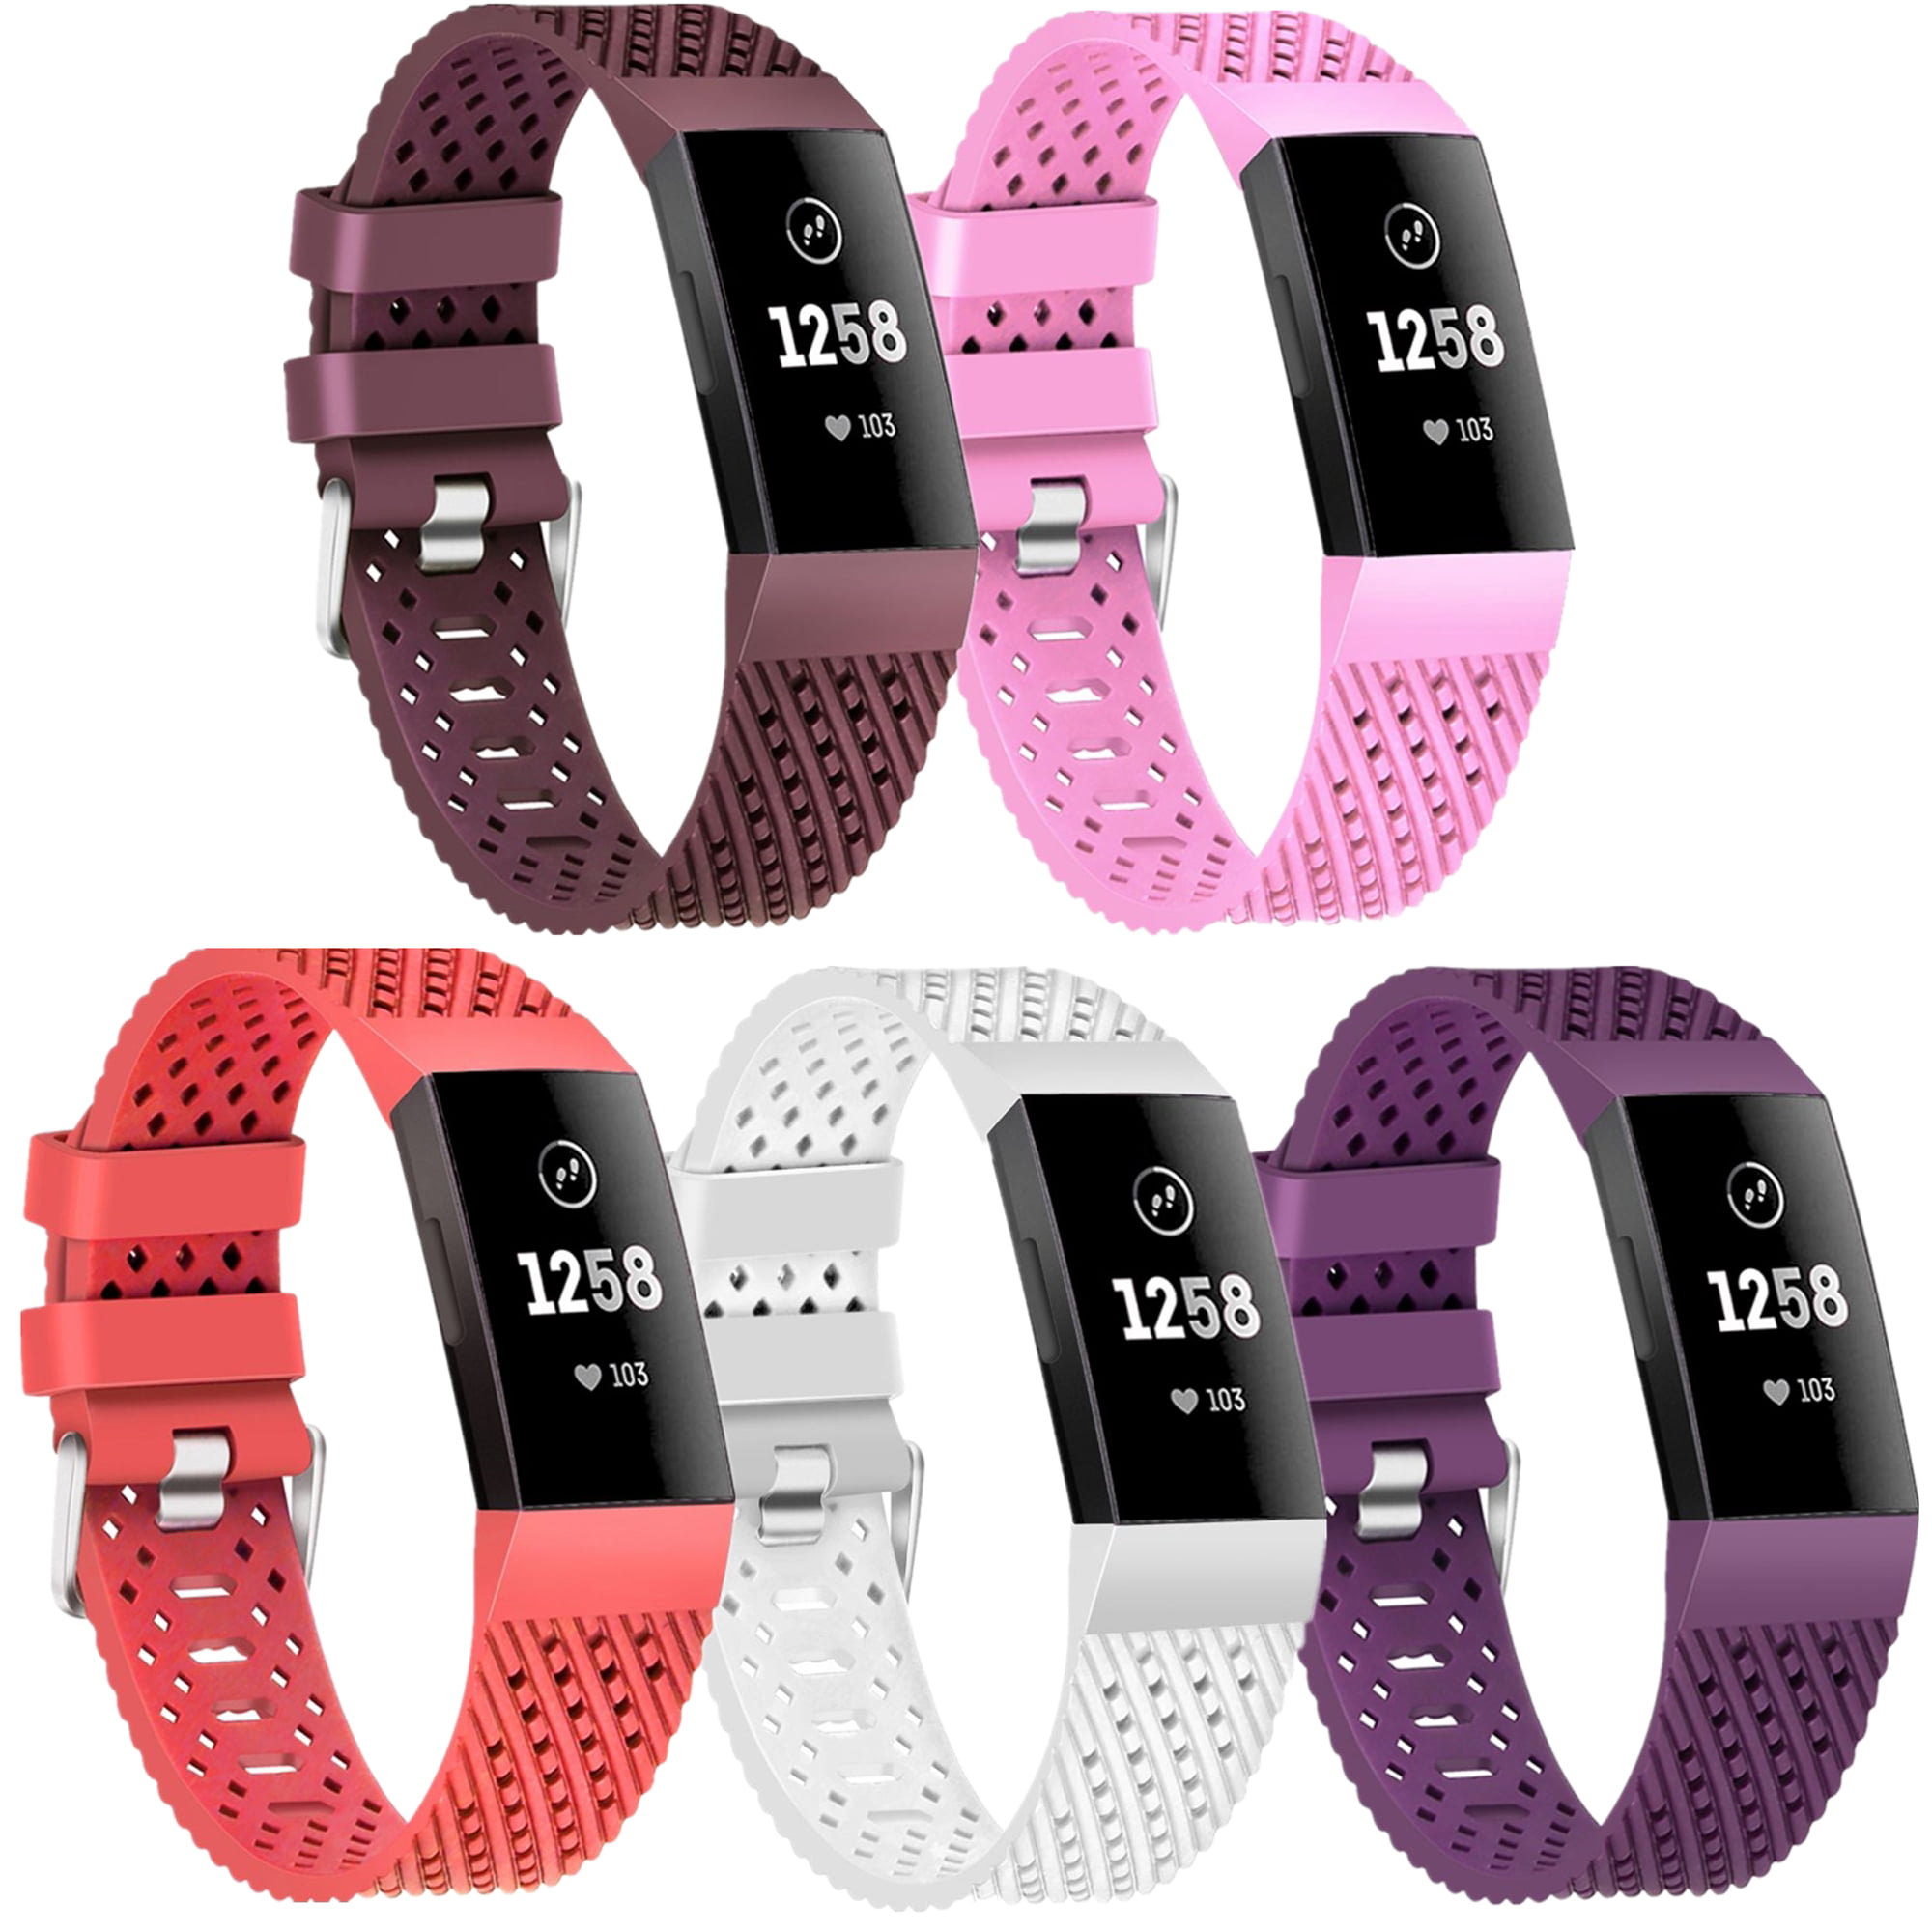 fitbit charge 3 bands walmart in store